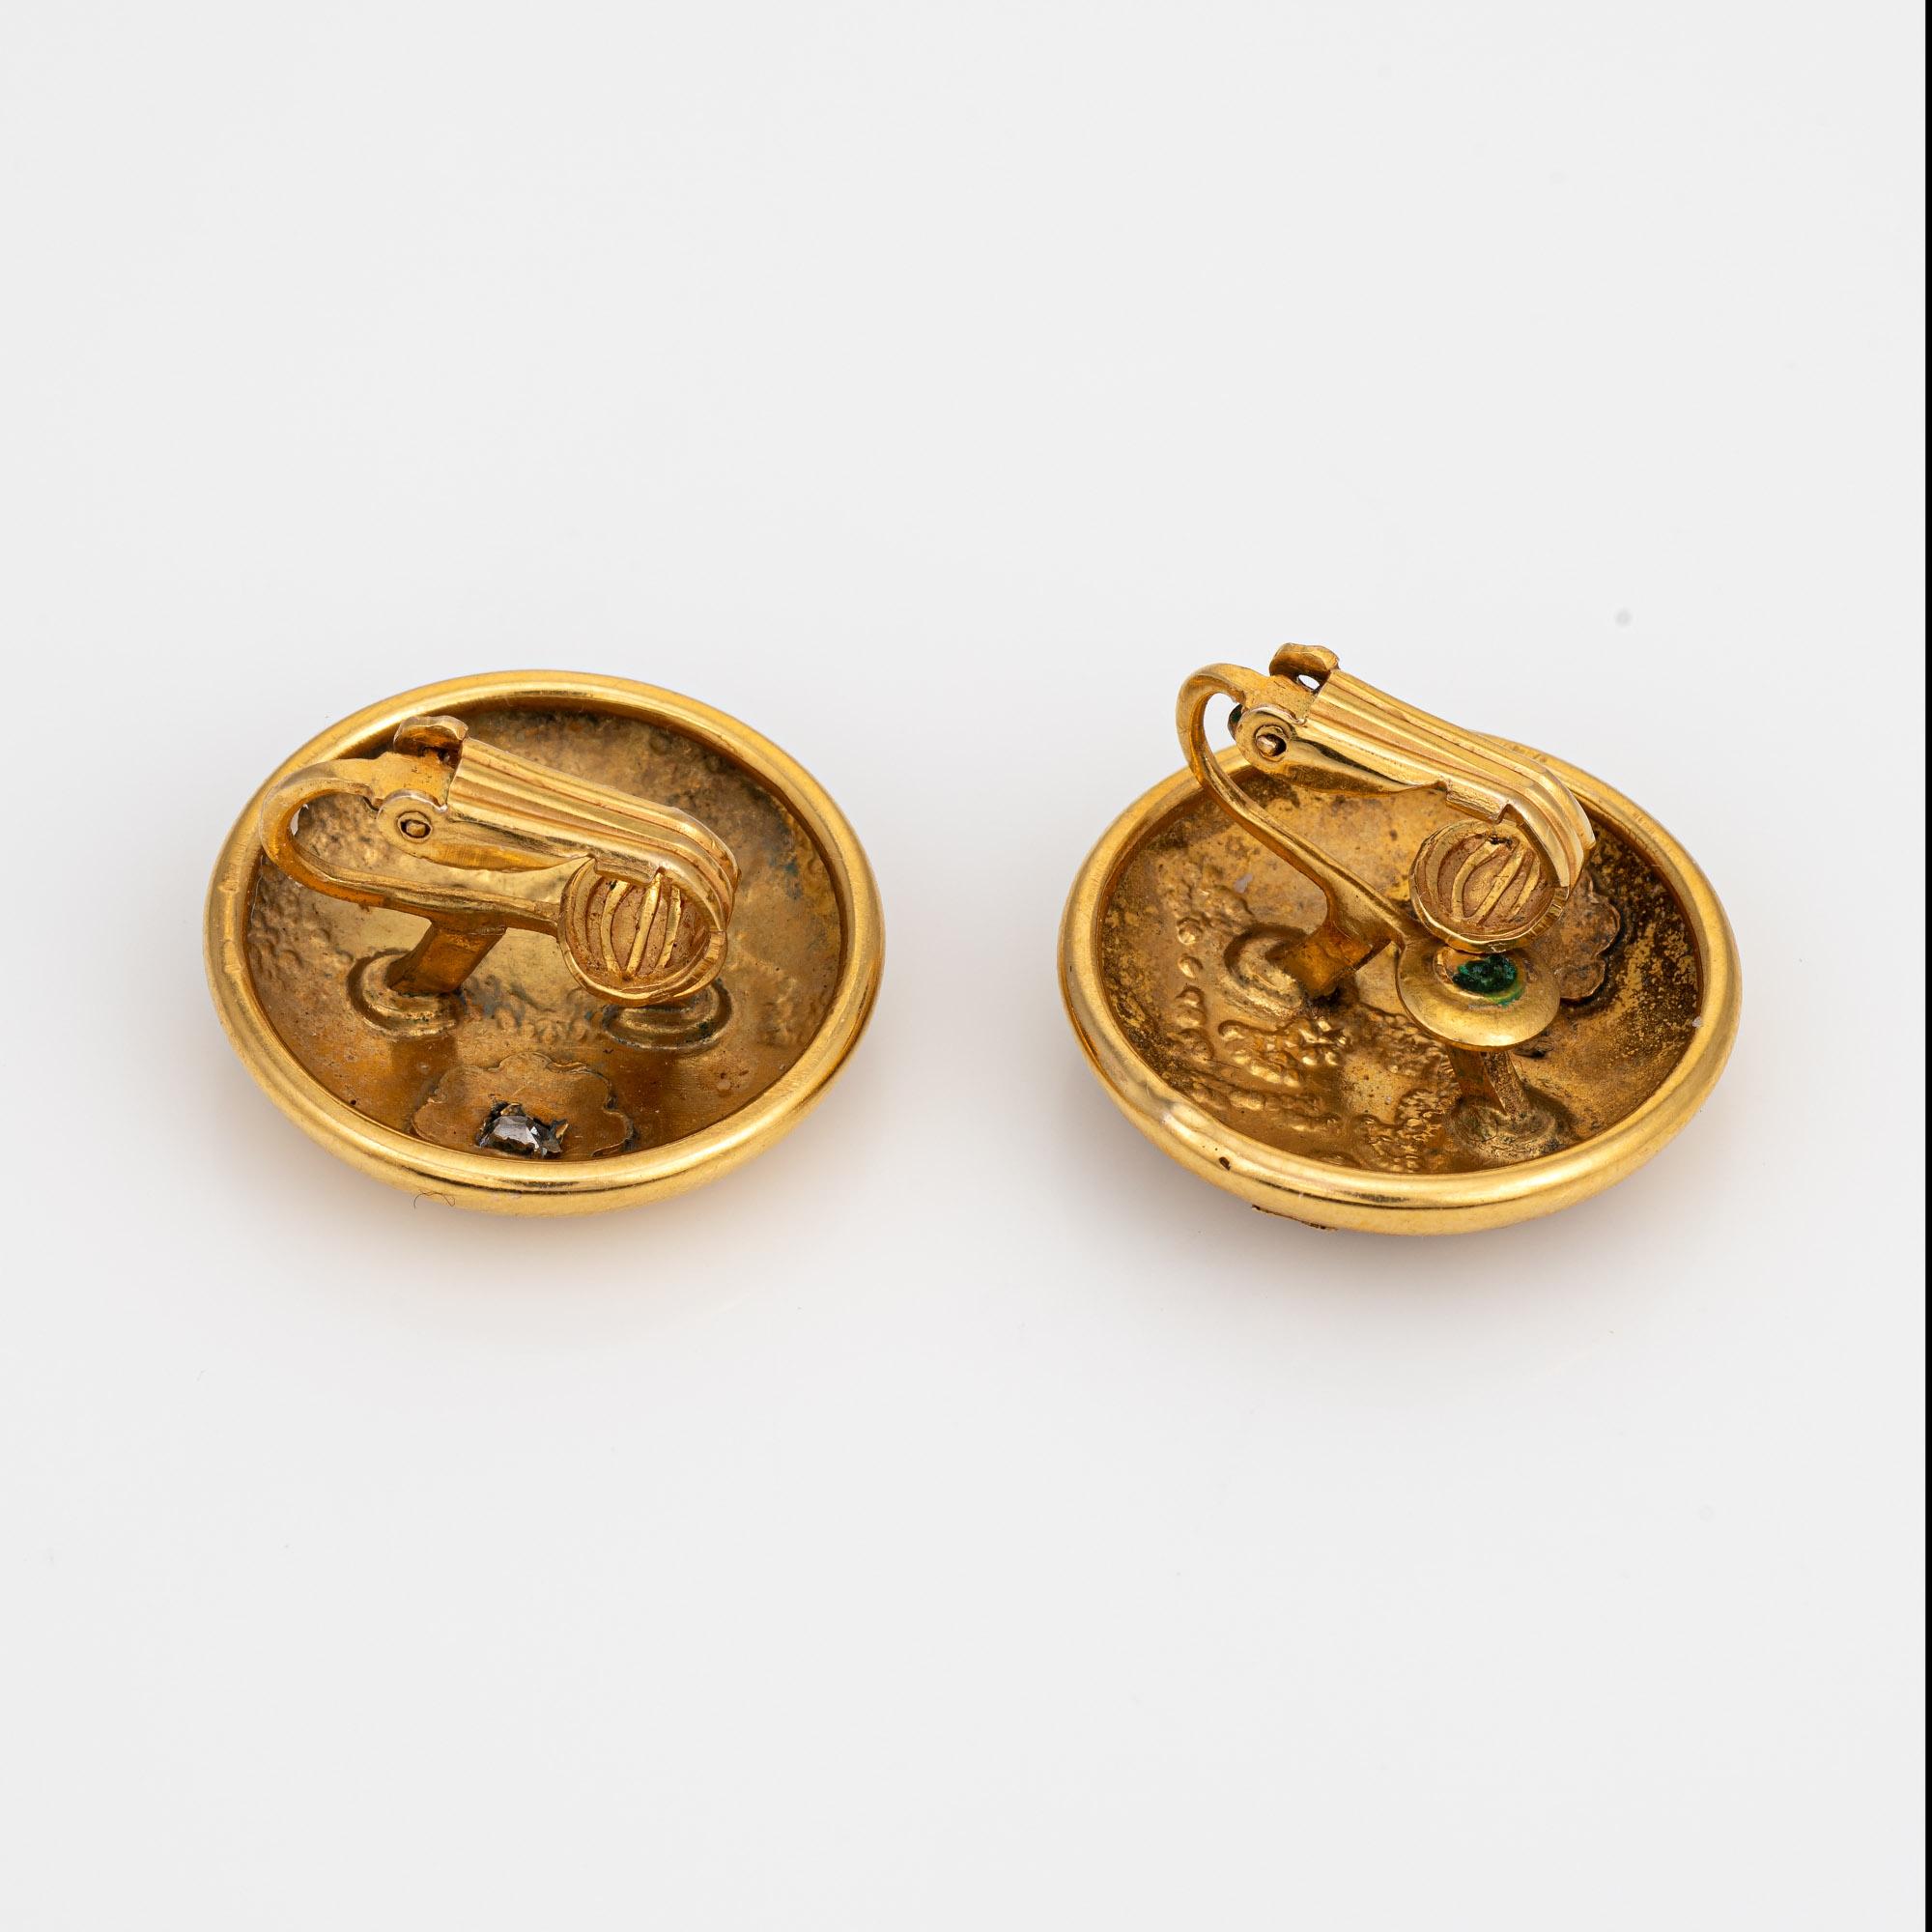 Elegant pair of antique Victorian diamond earrings (circa 1880s to 1900s) crafted in 10k yellow gold. 

Cushion cut diamonds are estimated at 0.05 carats each (0.10 carats total estimated weight). The diamonds are estimated at J-J color and SI2-I1